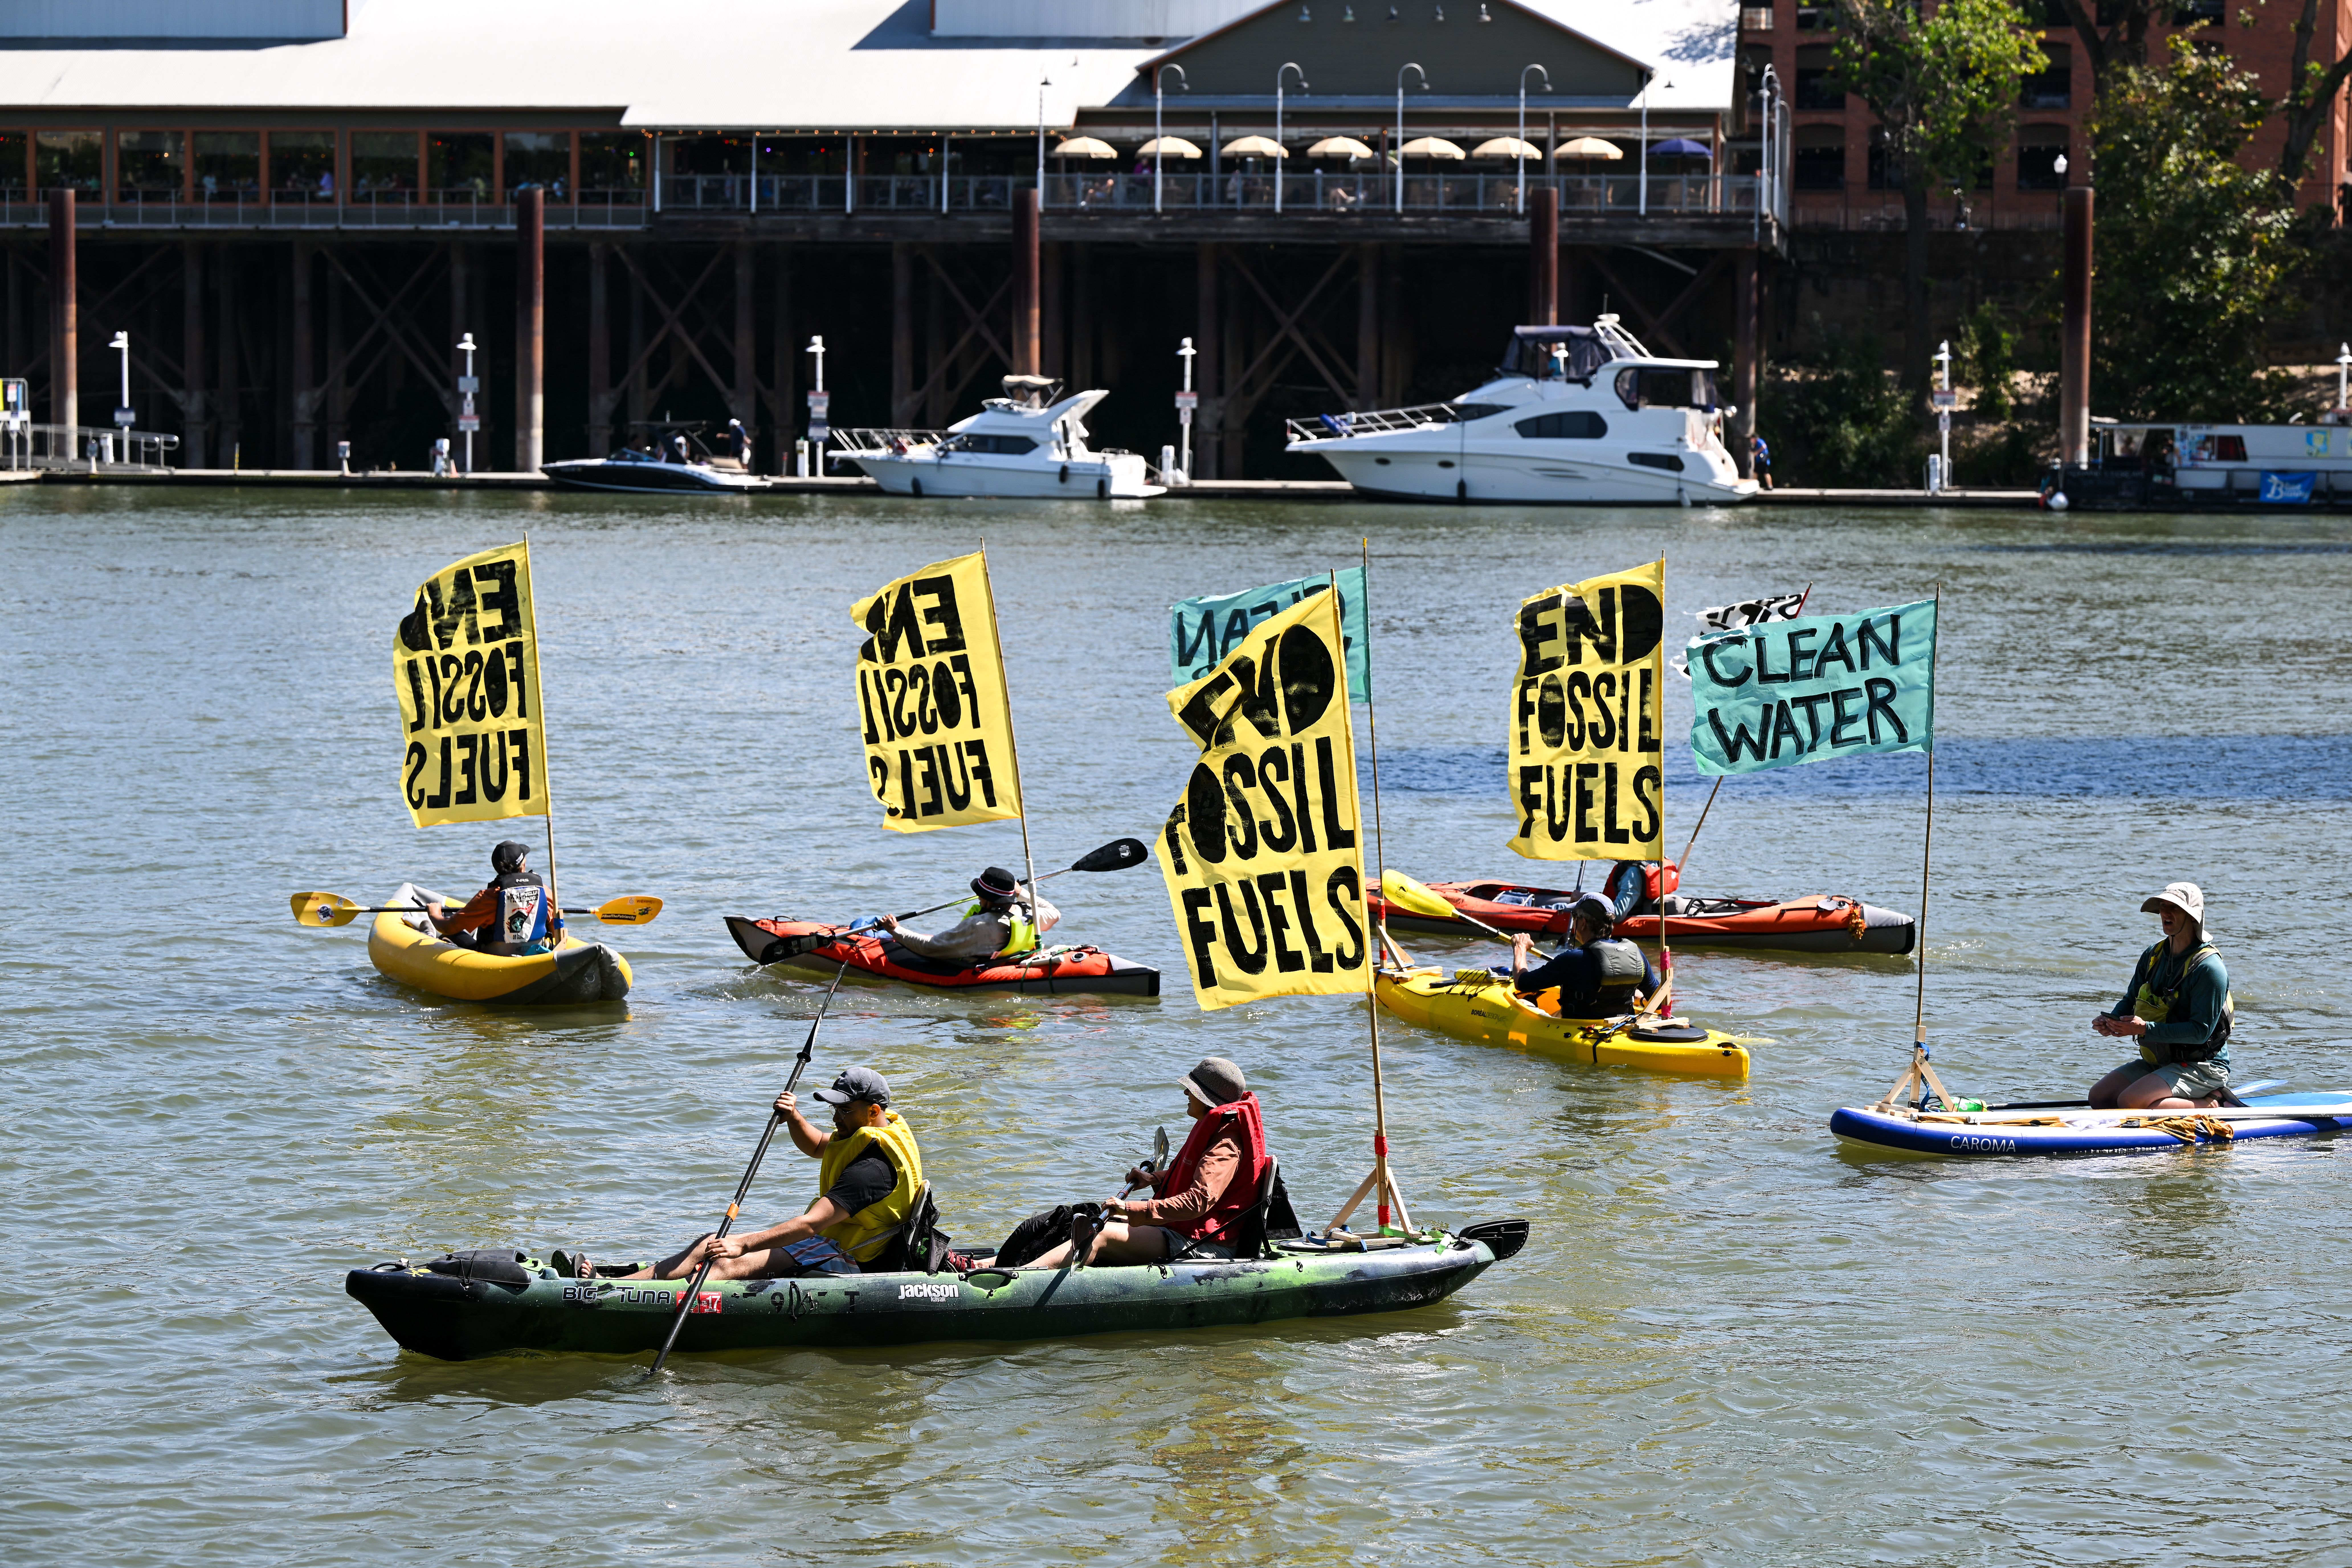 Activists kayak on the river with flags that say ''End Fossil Fuels'' as hundreds of climate change activists are gathered at Old Sacramento Waterfront near the Tower Bridge, to protest global climate change and fossil fuels, in Sacramento, California, United States on September 17.